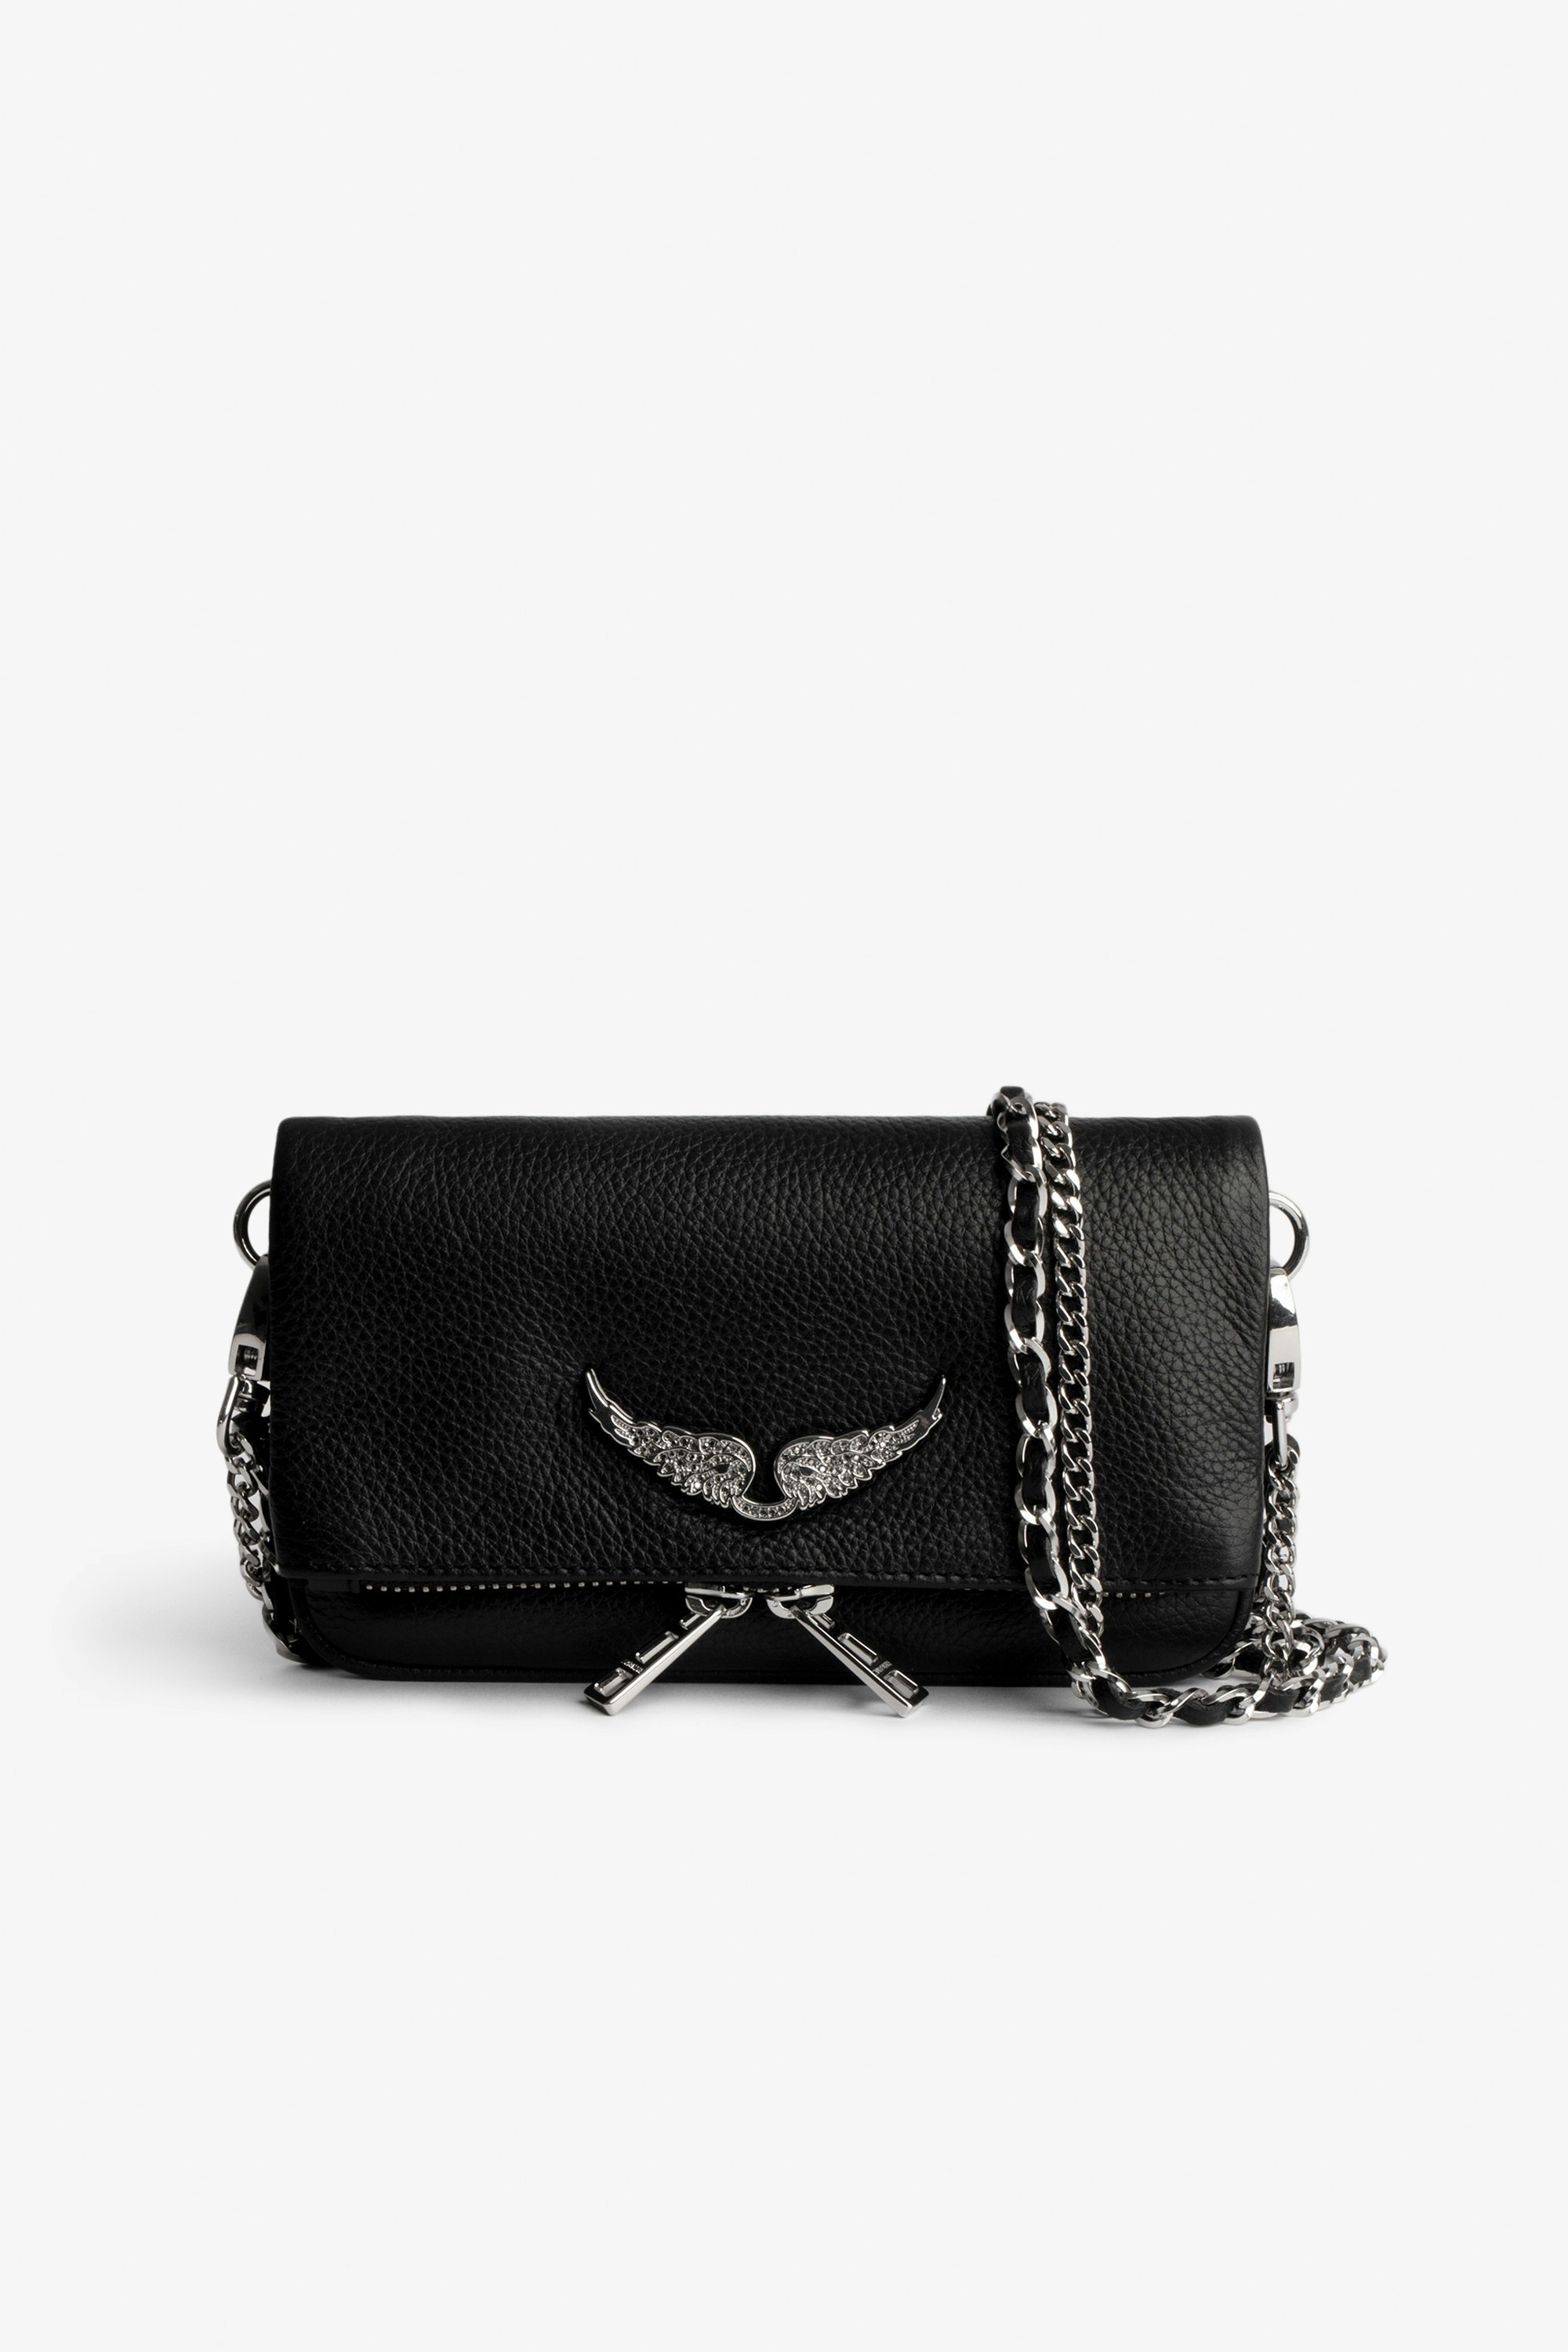 Swing Your Wings Rock Nano Clutch - Women’s black grained leather Swing Your Wings Rock Nano clutch with leather shoulder strap and chain